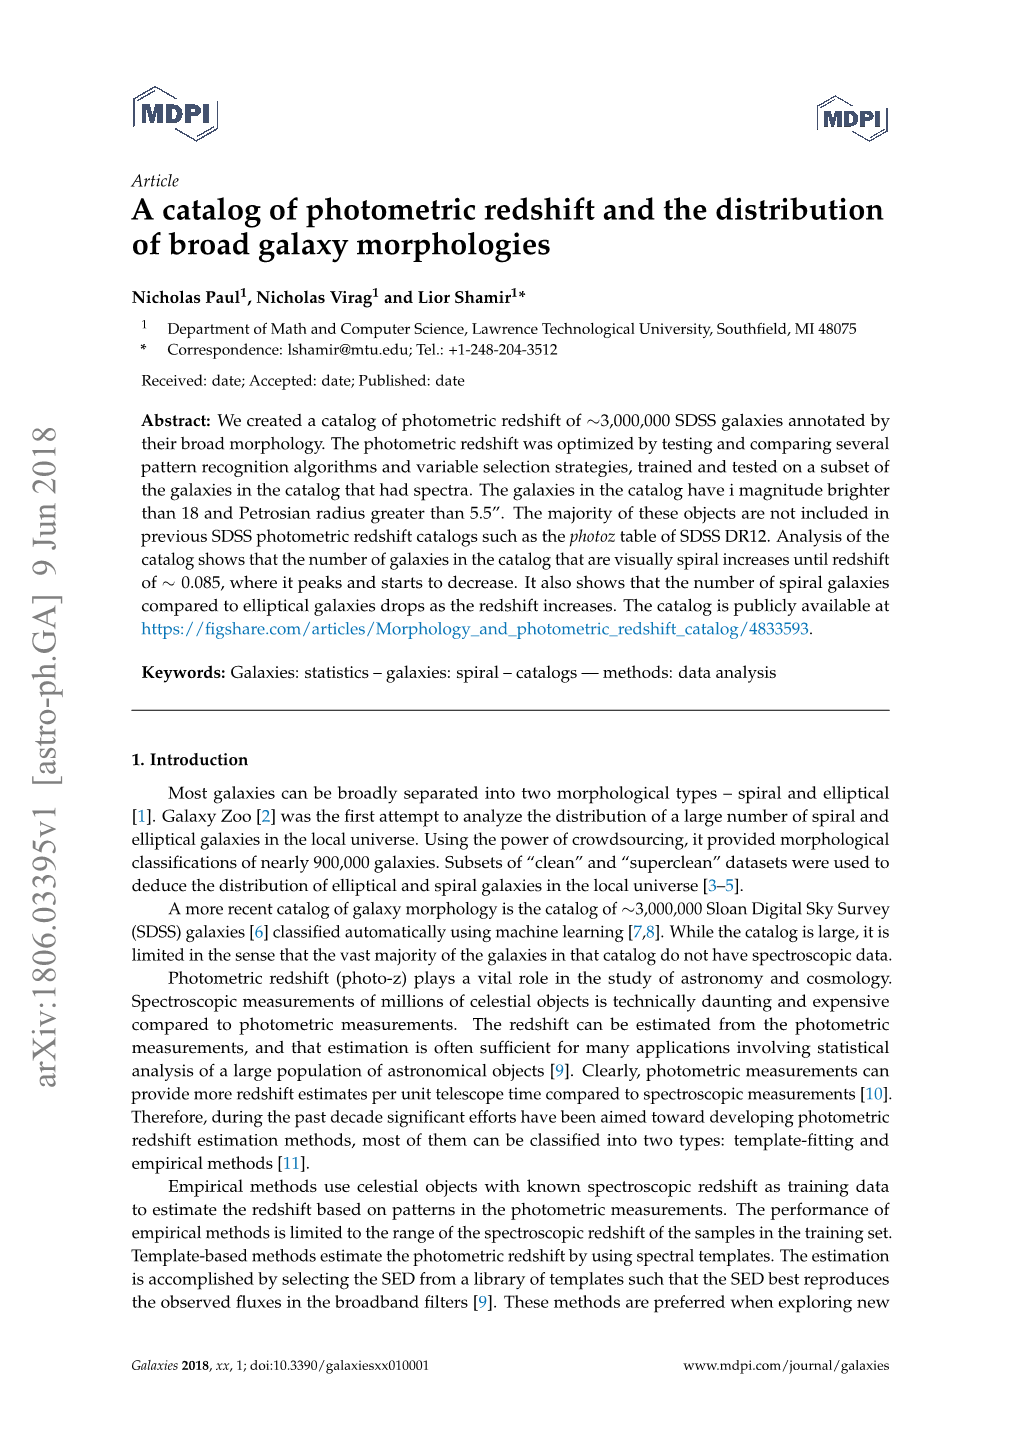 A Catalog of Photometric Redshift and the Distribution of Broad Galaxy Morphologies